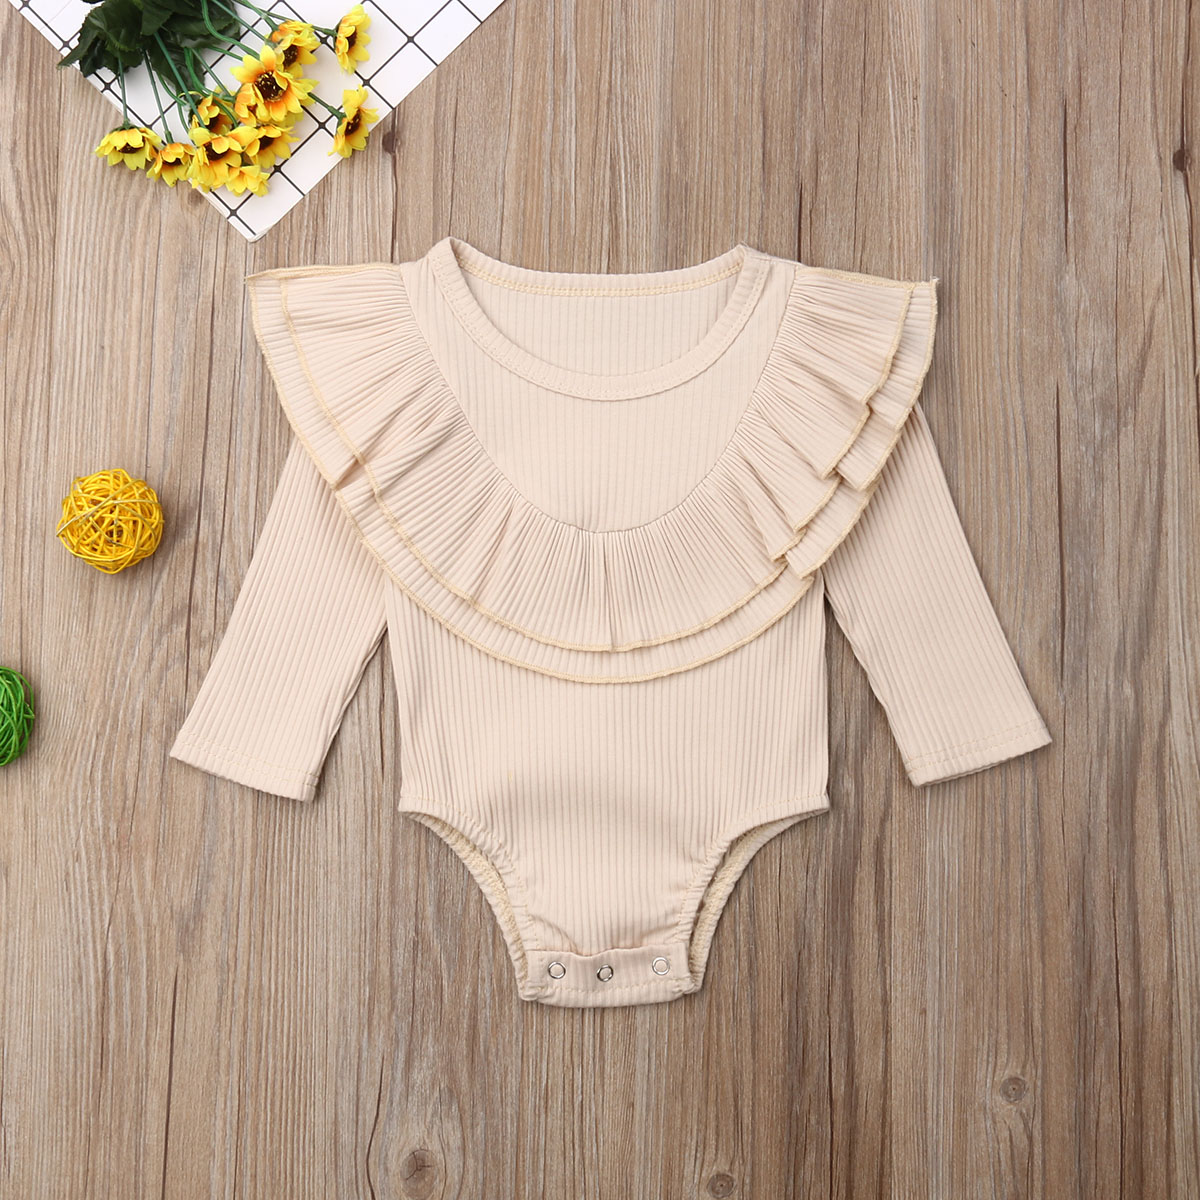 2019 Baby Spring Autumn Clothing Newborn Baby Girl Boys Ribbed Solid Bodysuit Long Sleeve Jumpsuit Playsuit Outfit Clothes 0-24M